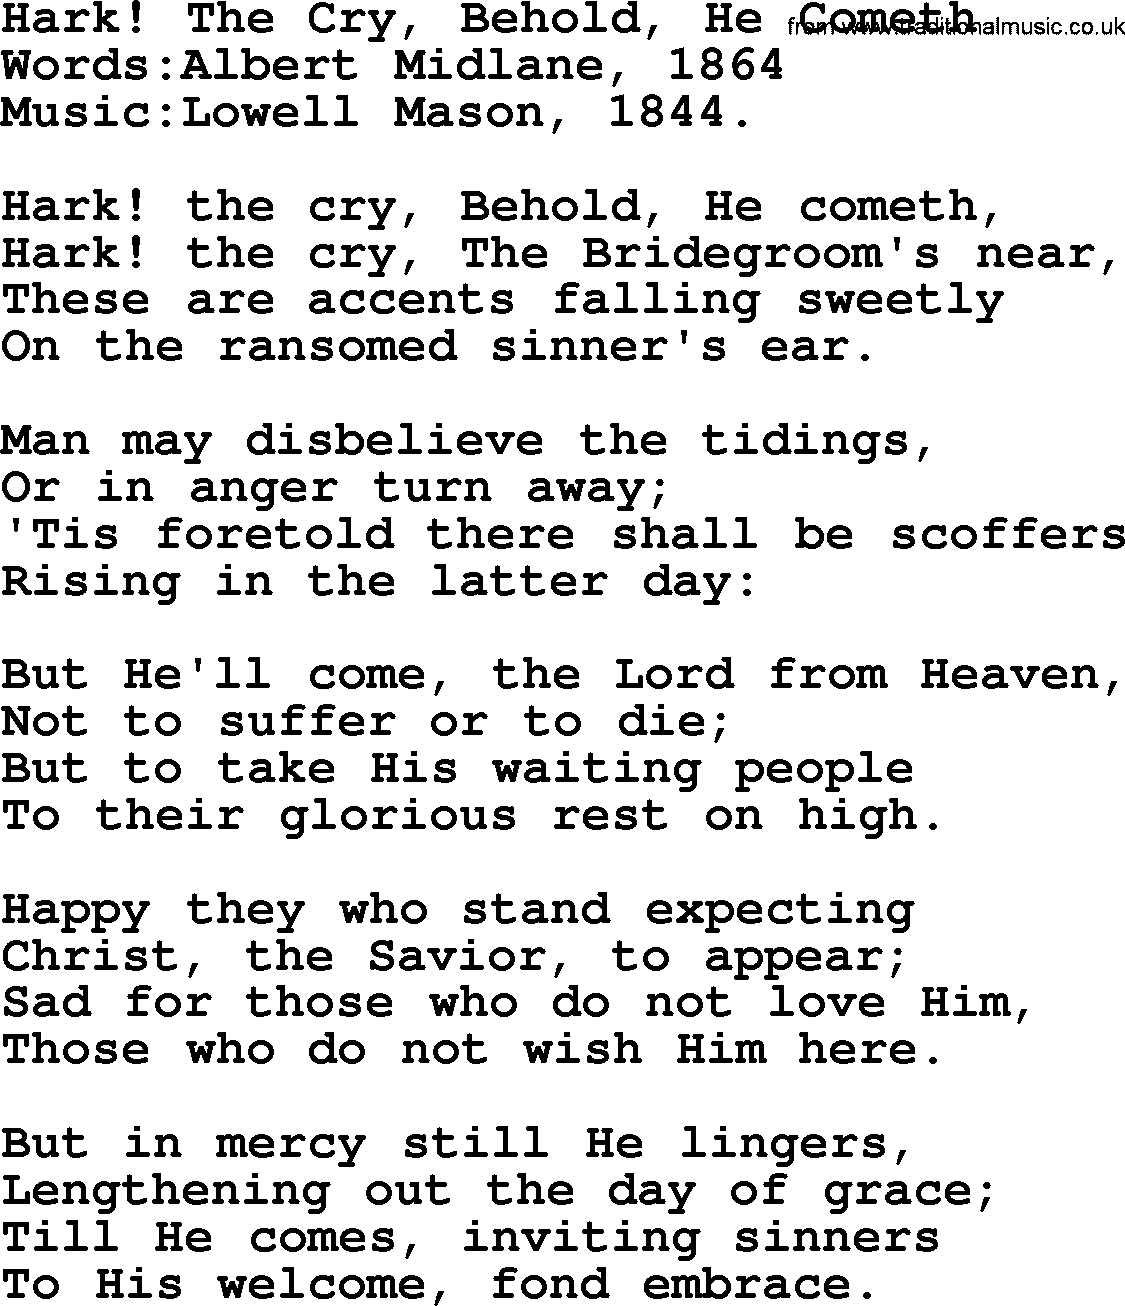 Christian hymns and songs about Jesus' Return(The Second Coming): Hark! The Cry, Behold, He Cometh, lyrics with PDF